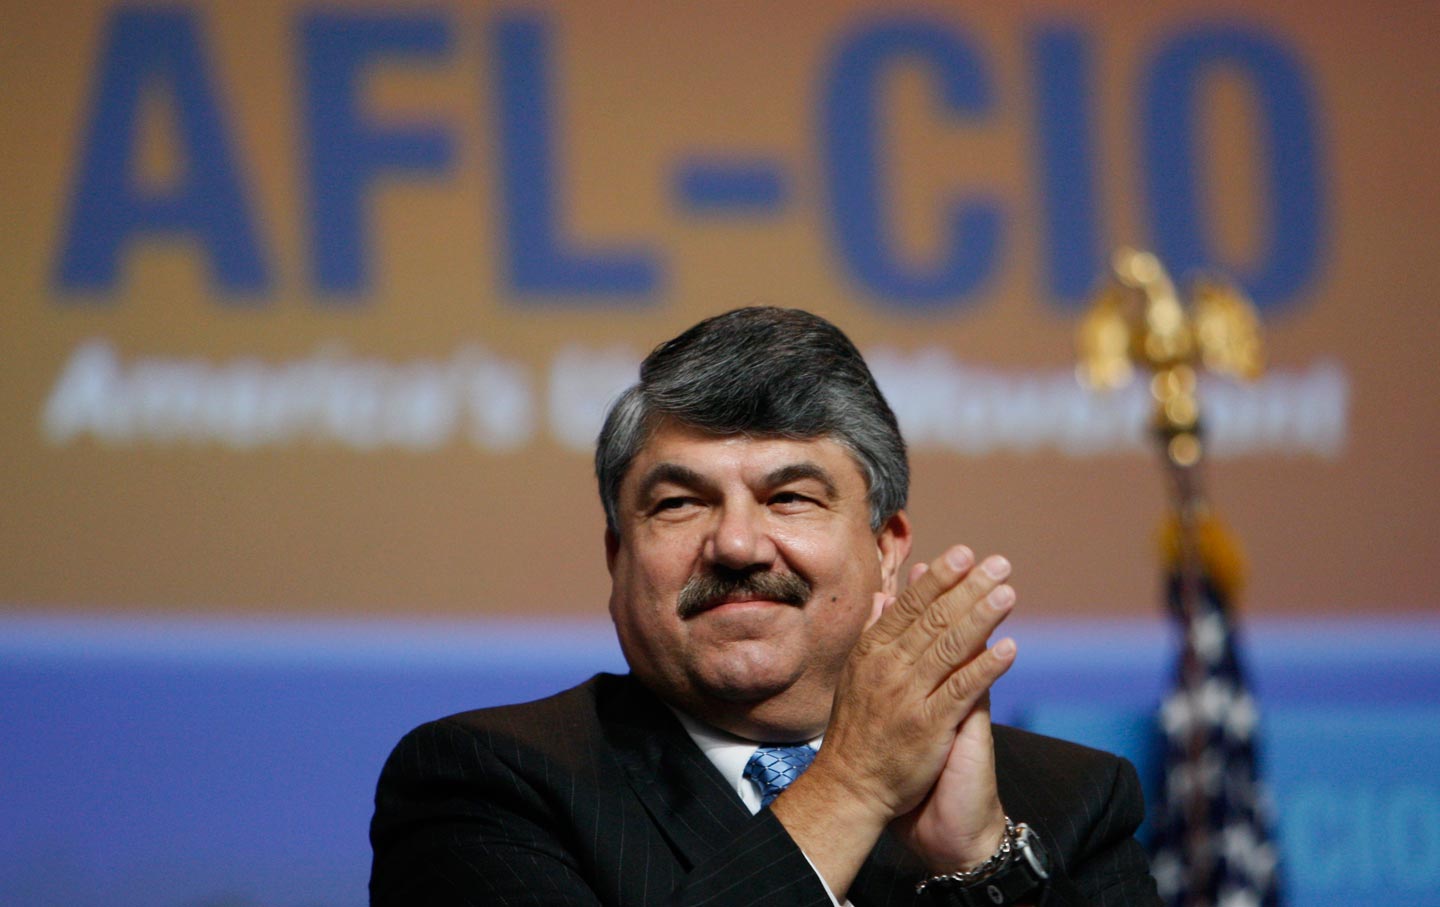 The AFL-CIO Is to Remain Neutral in the Democratic Primary